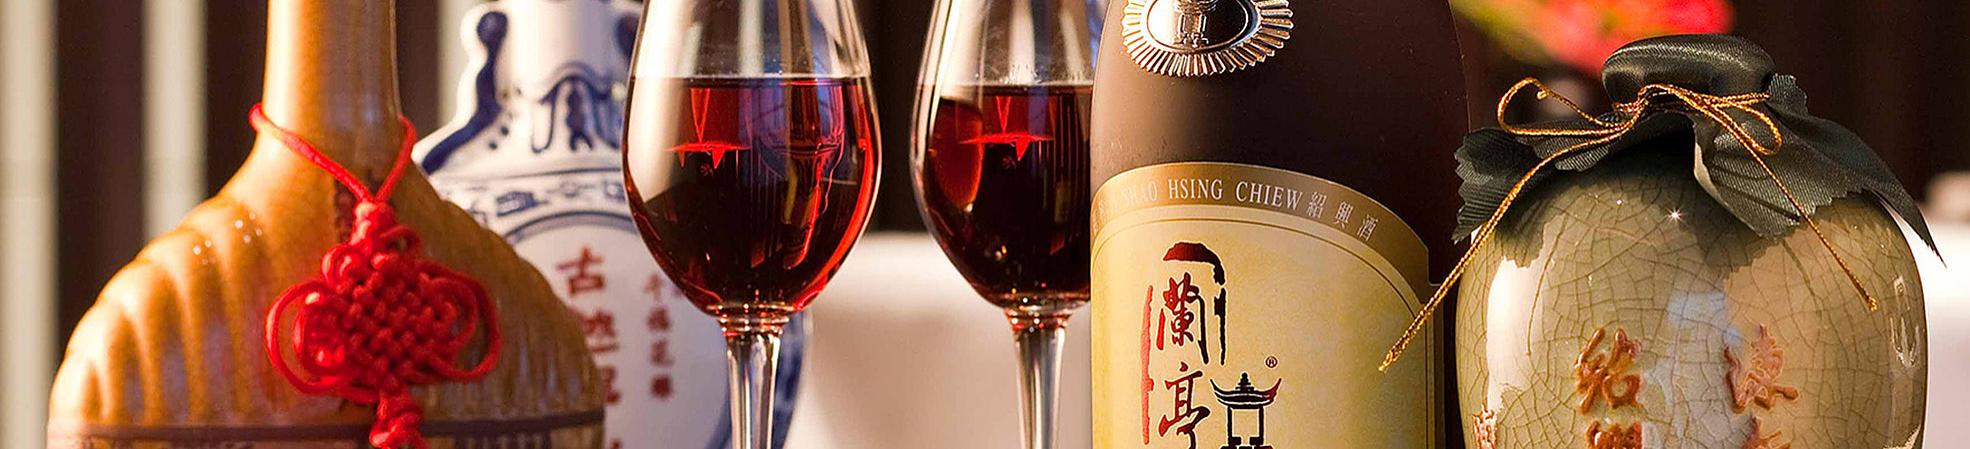 Chinese Alcoholic Drinks